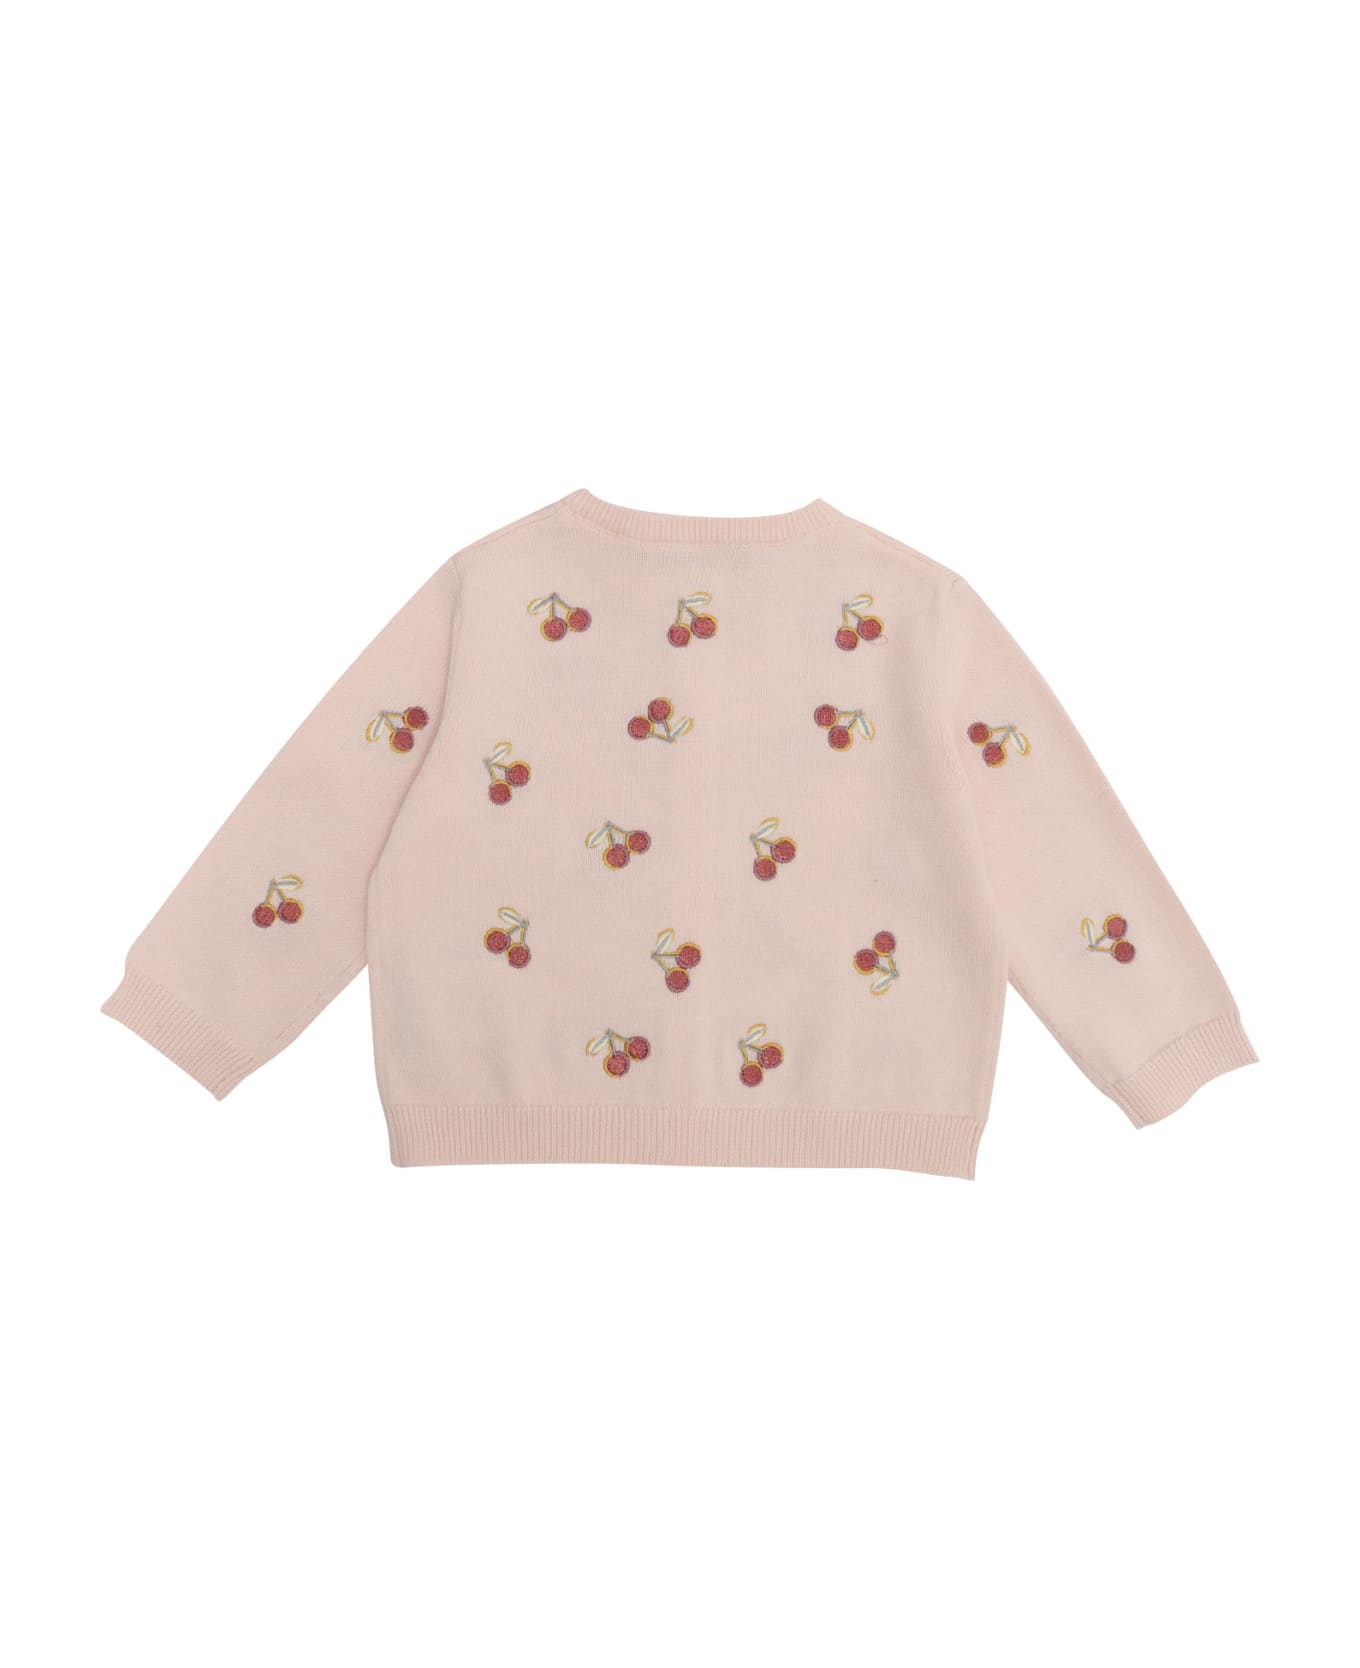 Bonpoint Girl's Cardigan With Cherries - PINK